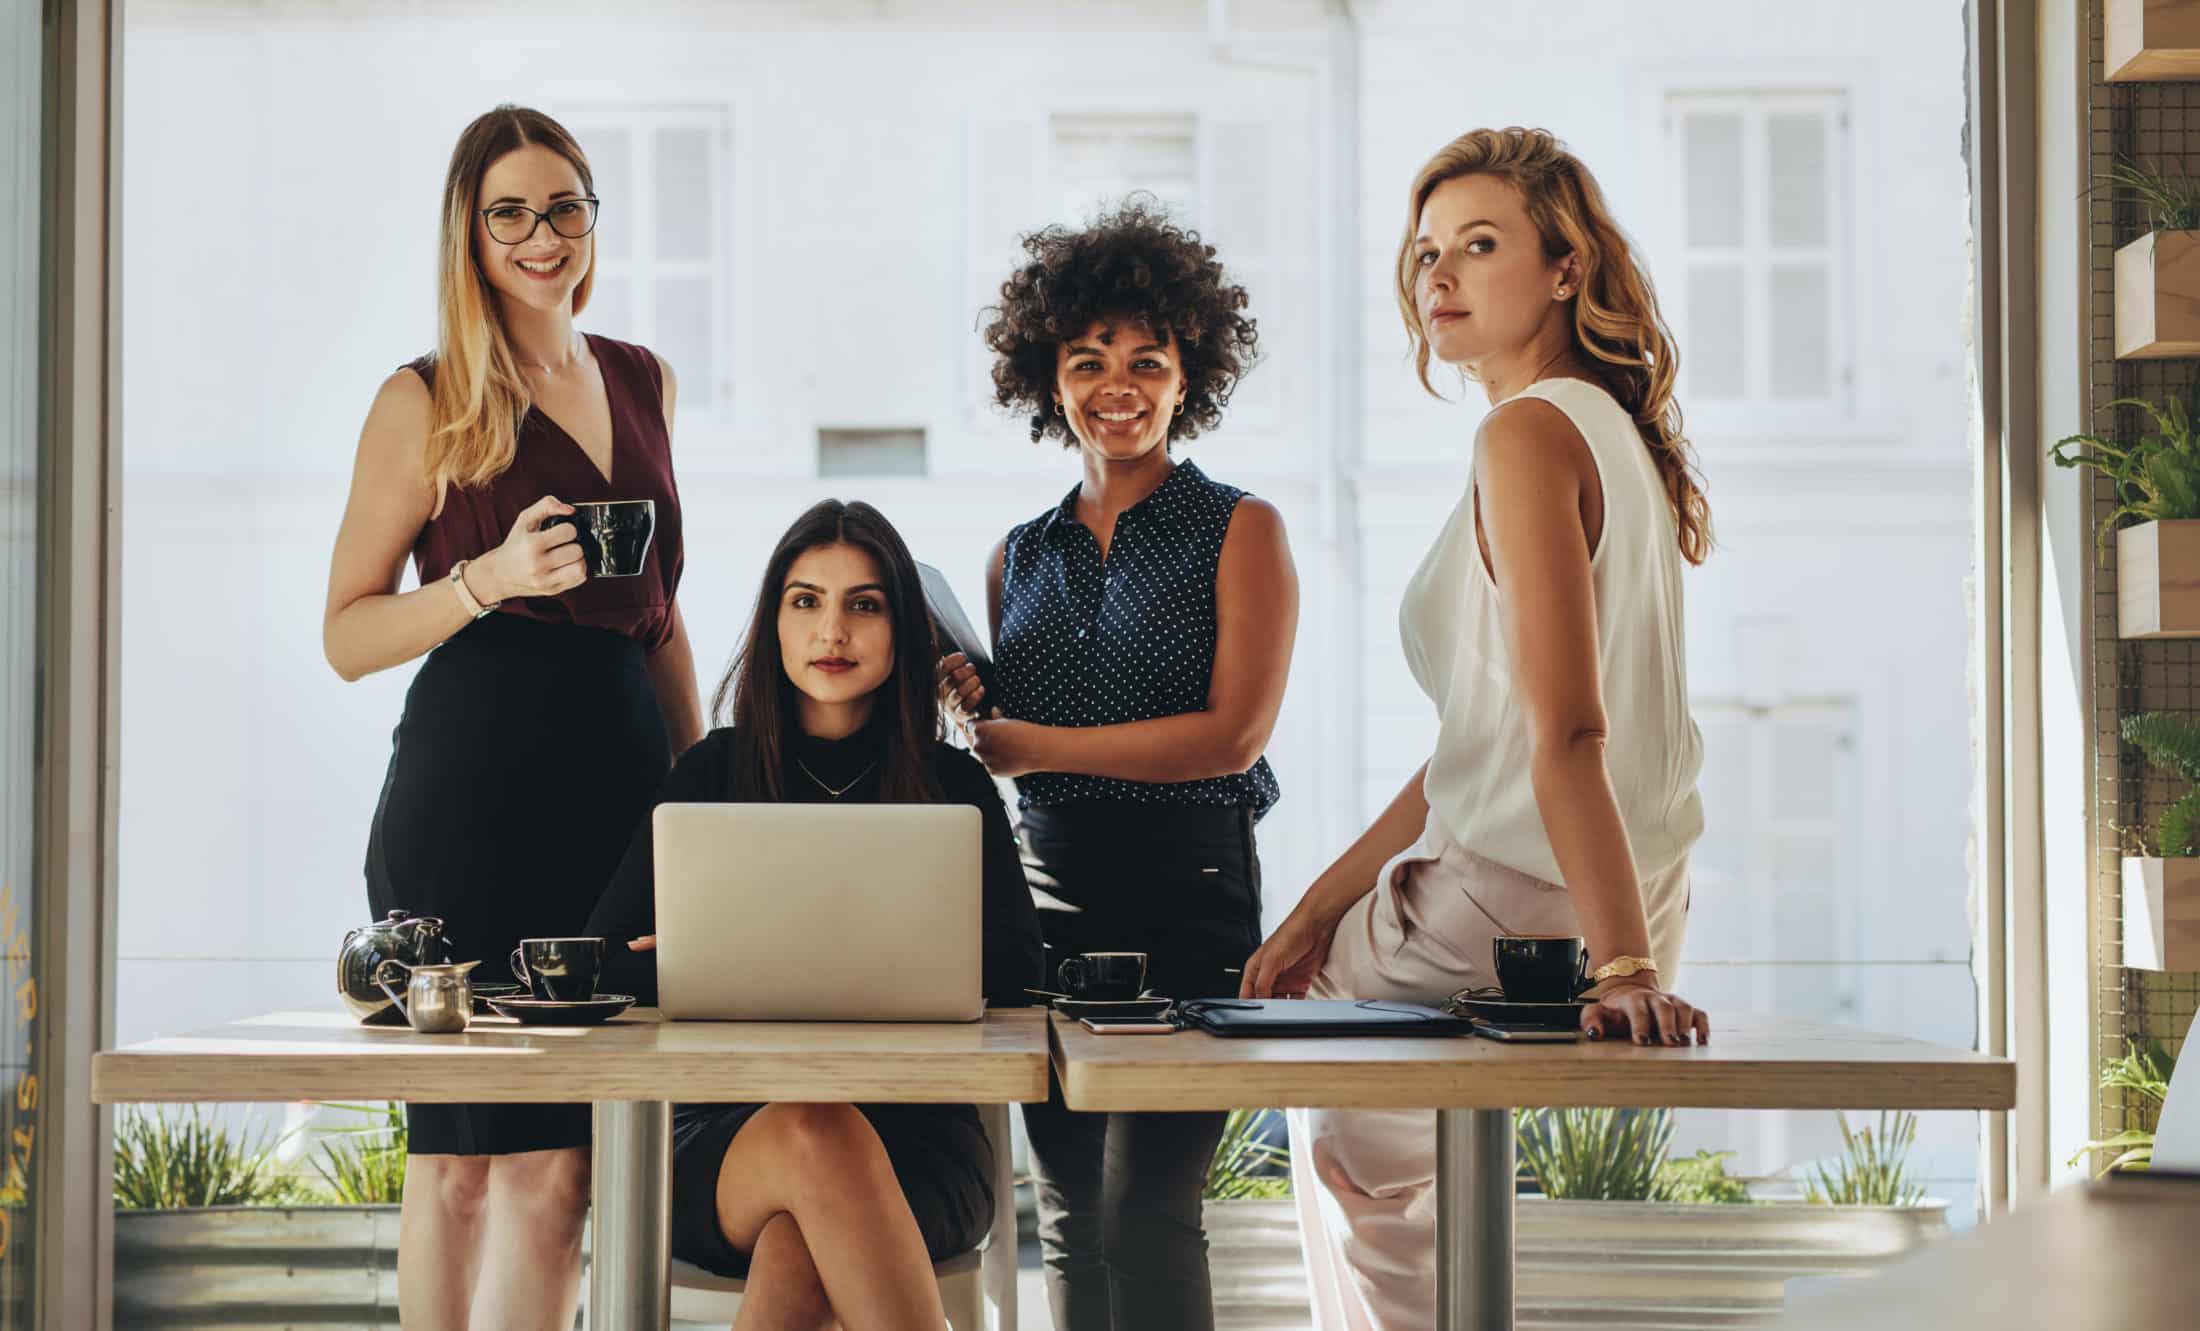 Resources for Women in Business